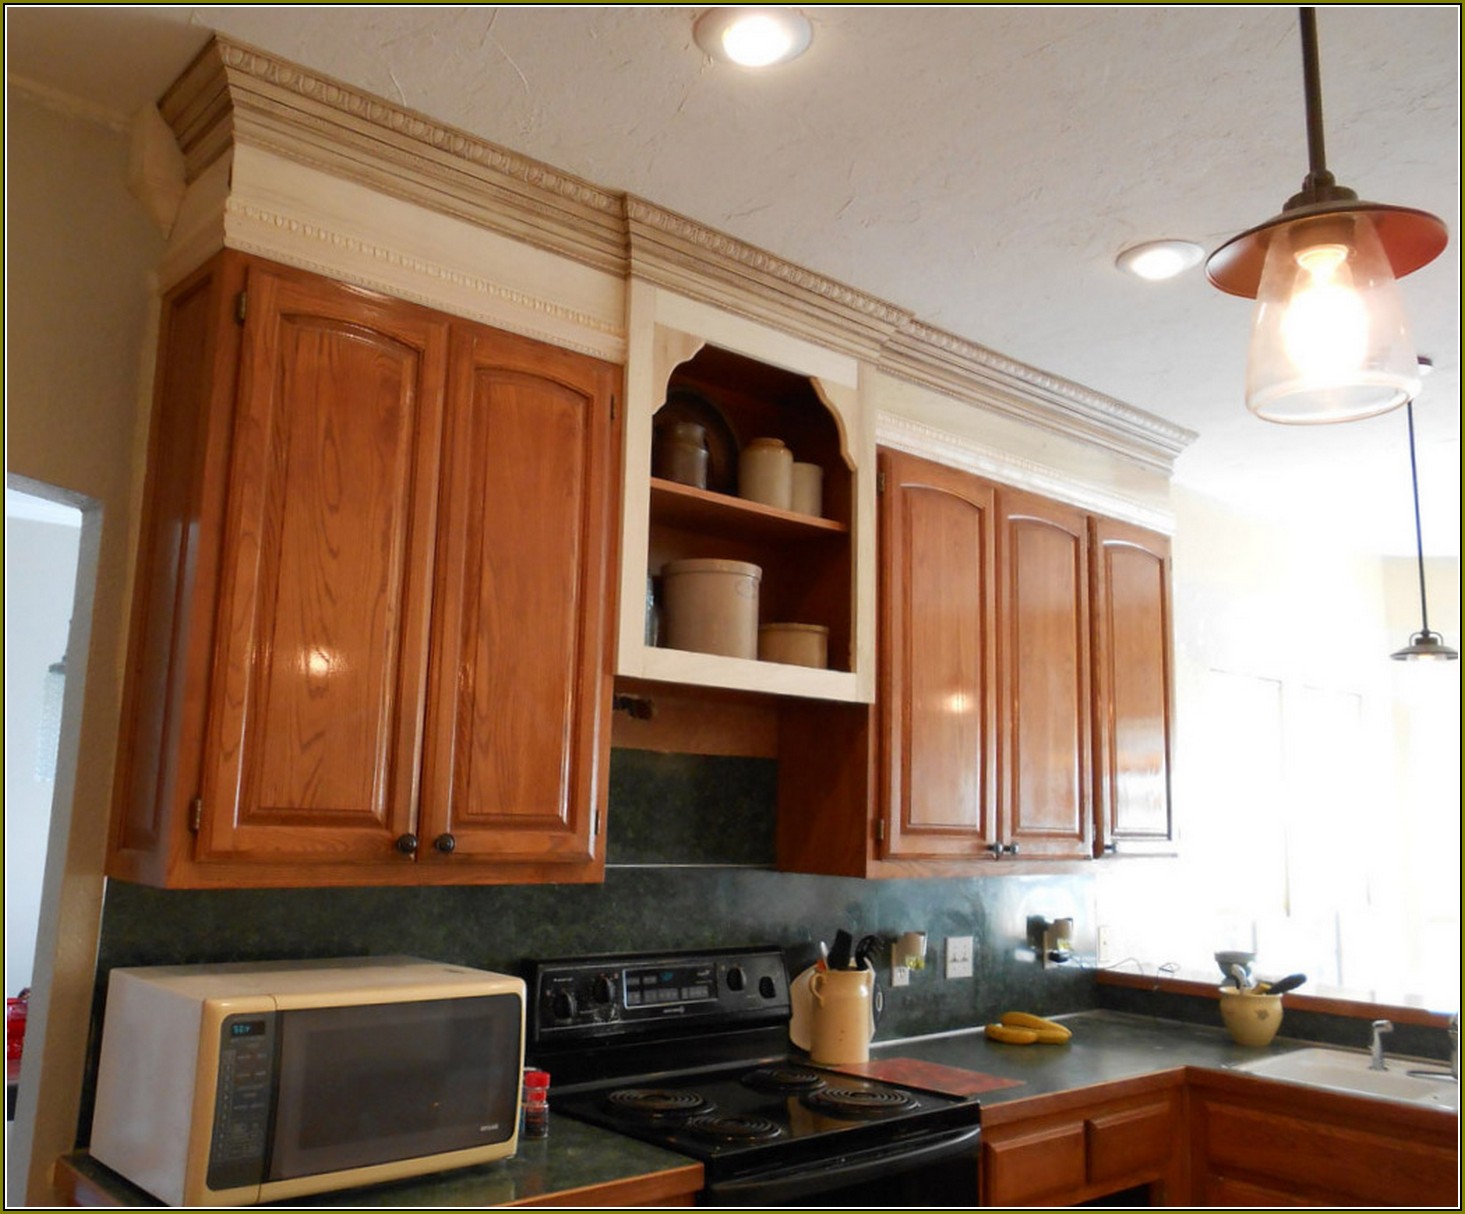 Upper Kitchen Cabinets To Ceiling